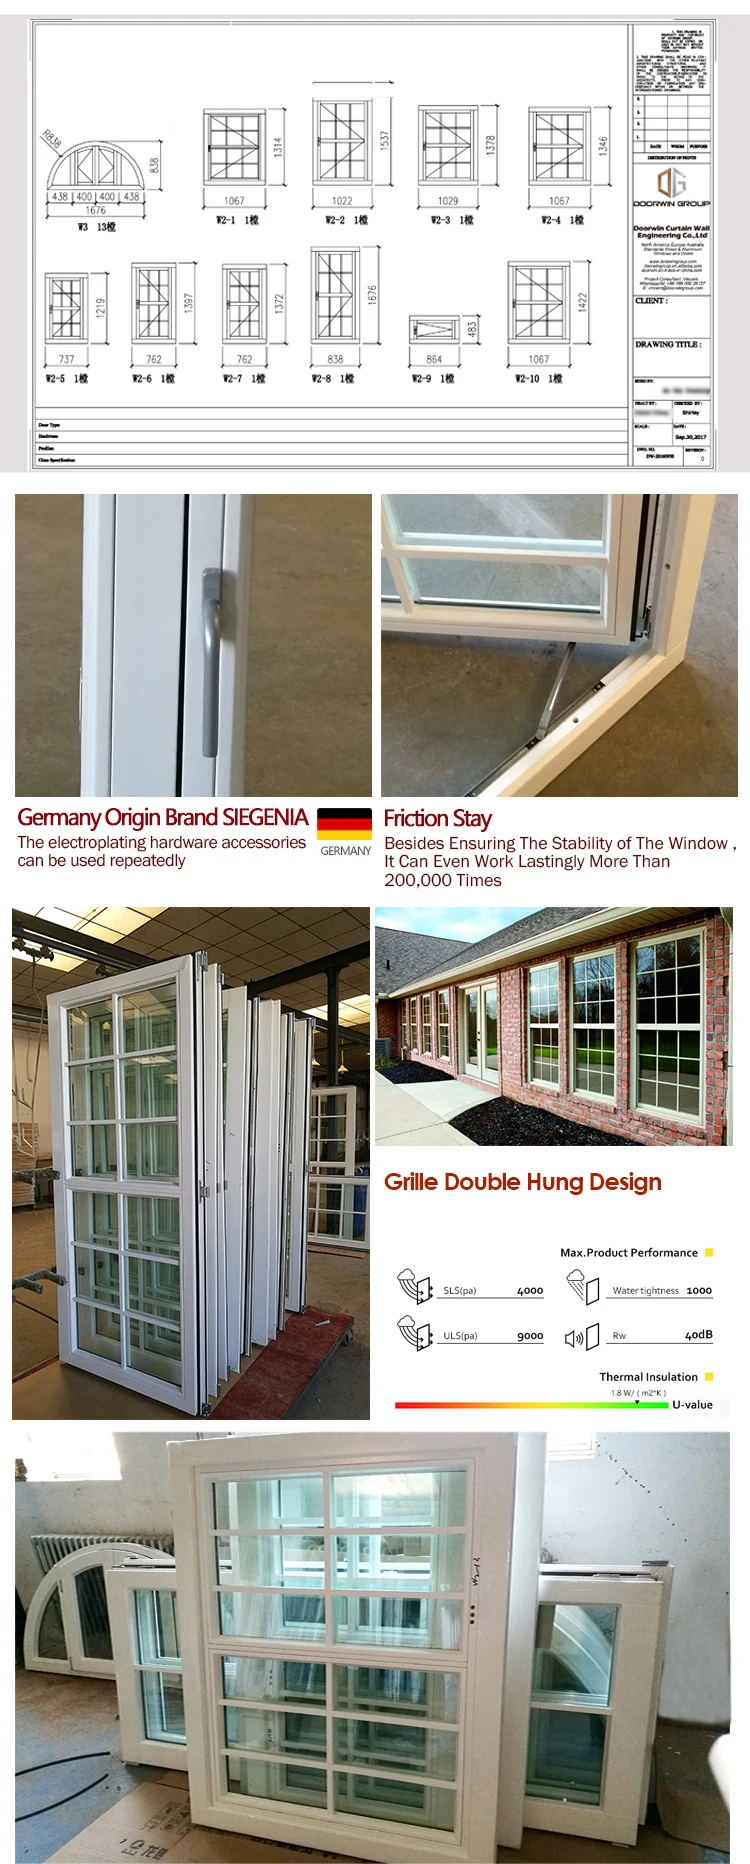 Hot selling  and high quality San Diego  style casement window white oak wooden frame out swing open windows